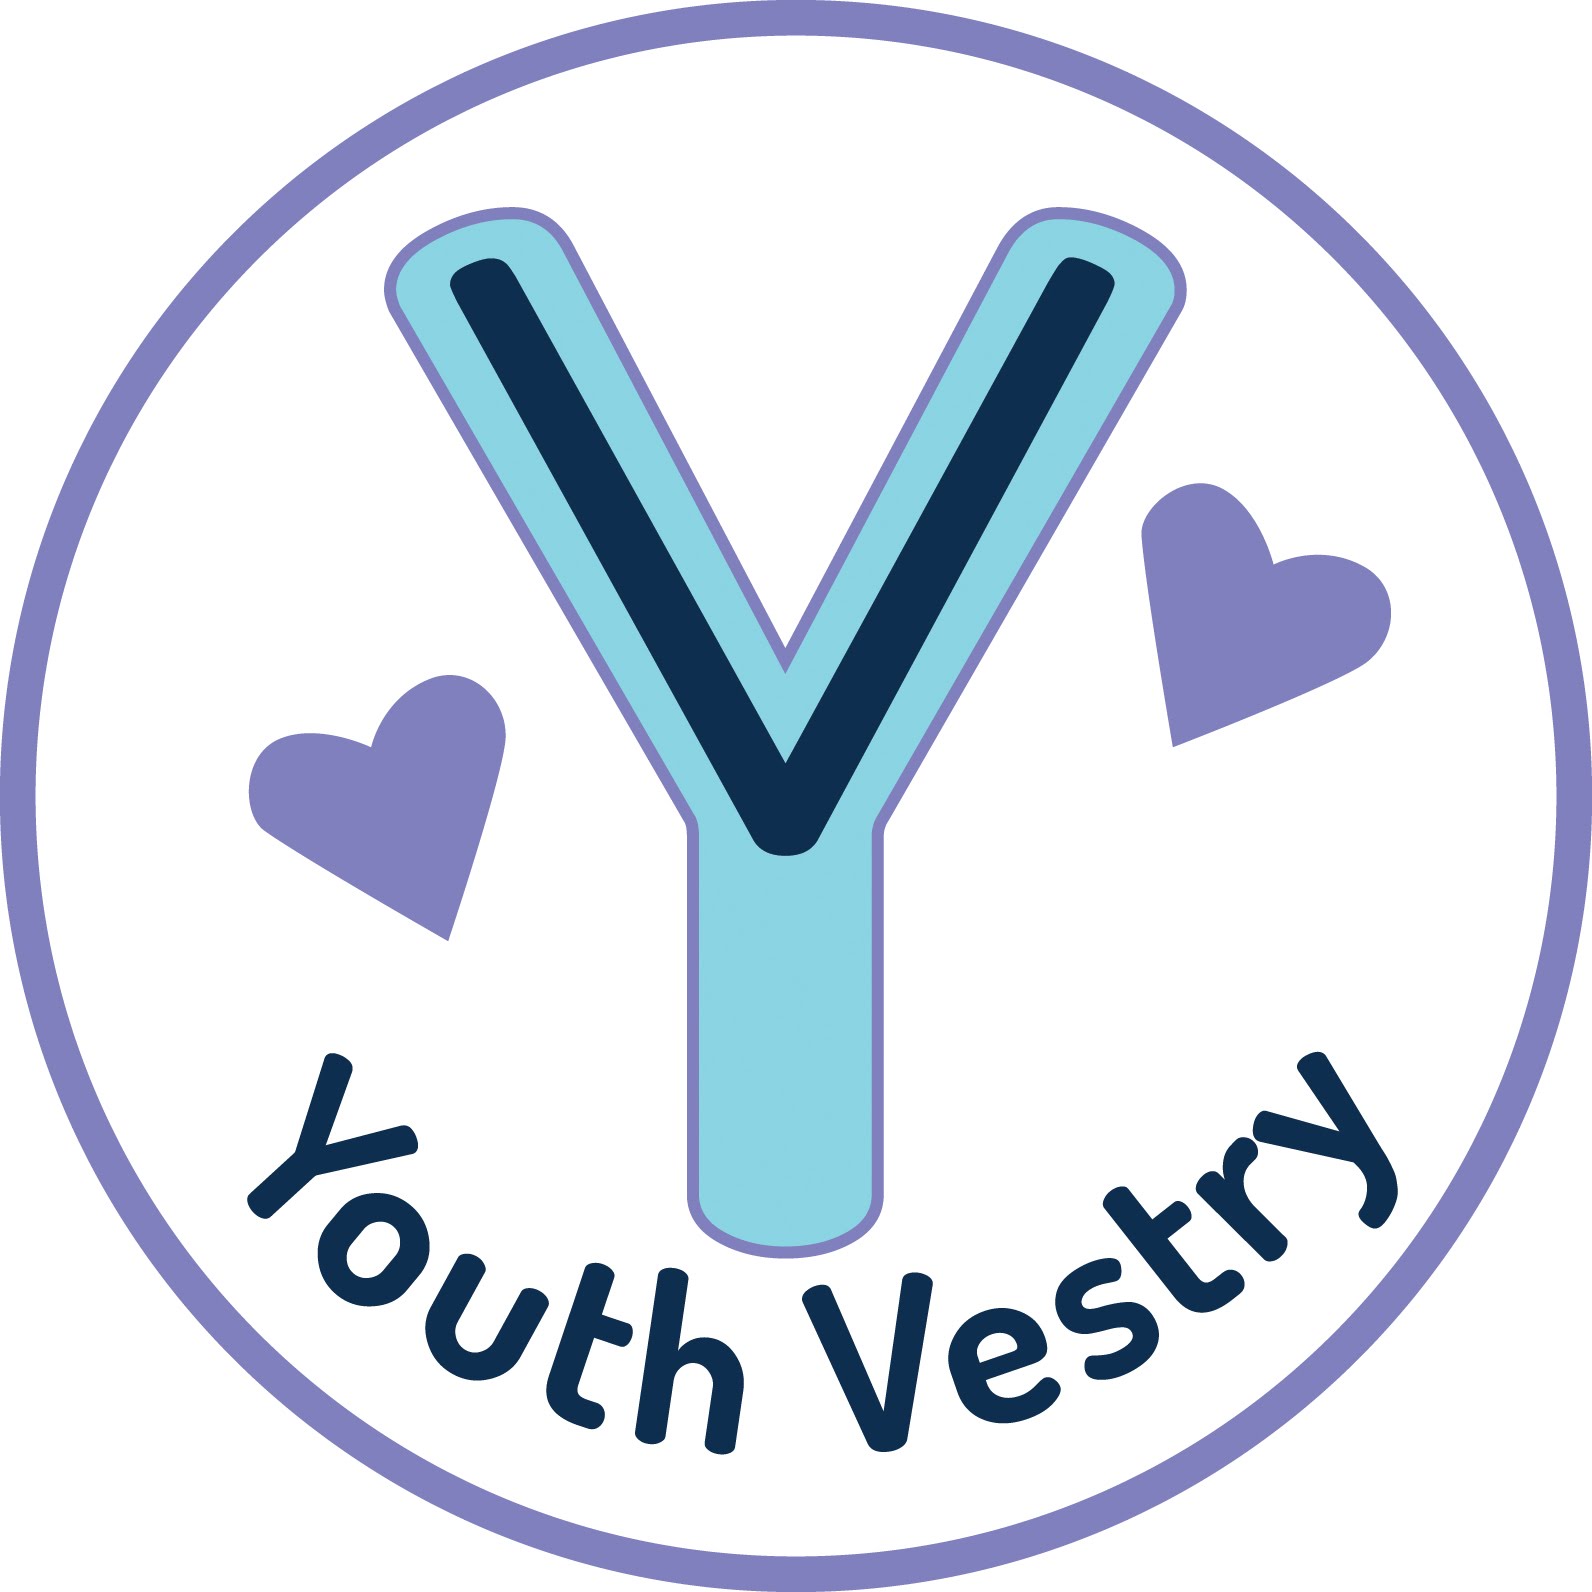 One of the Youth Vestry members, Eva, created the group’s logo